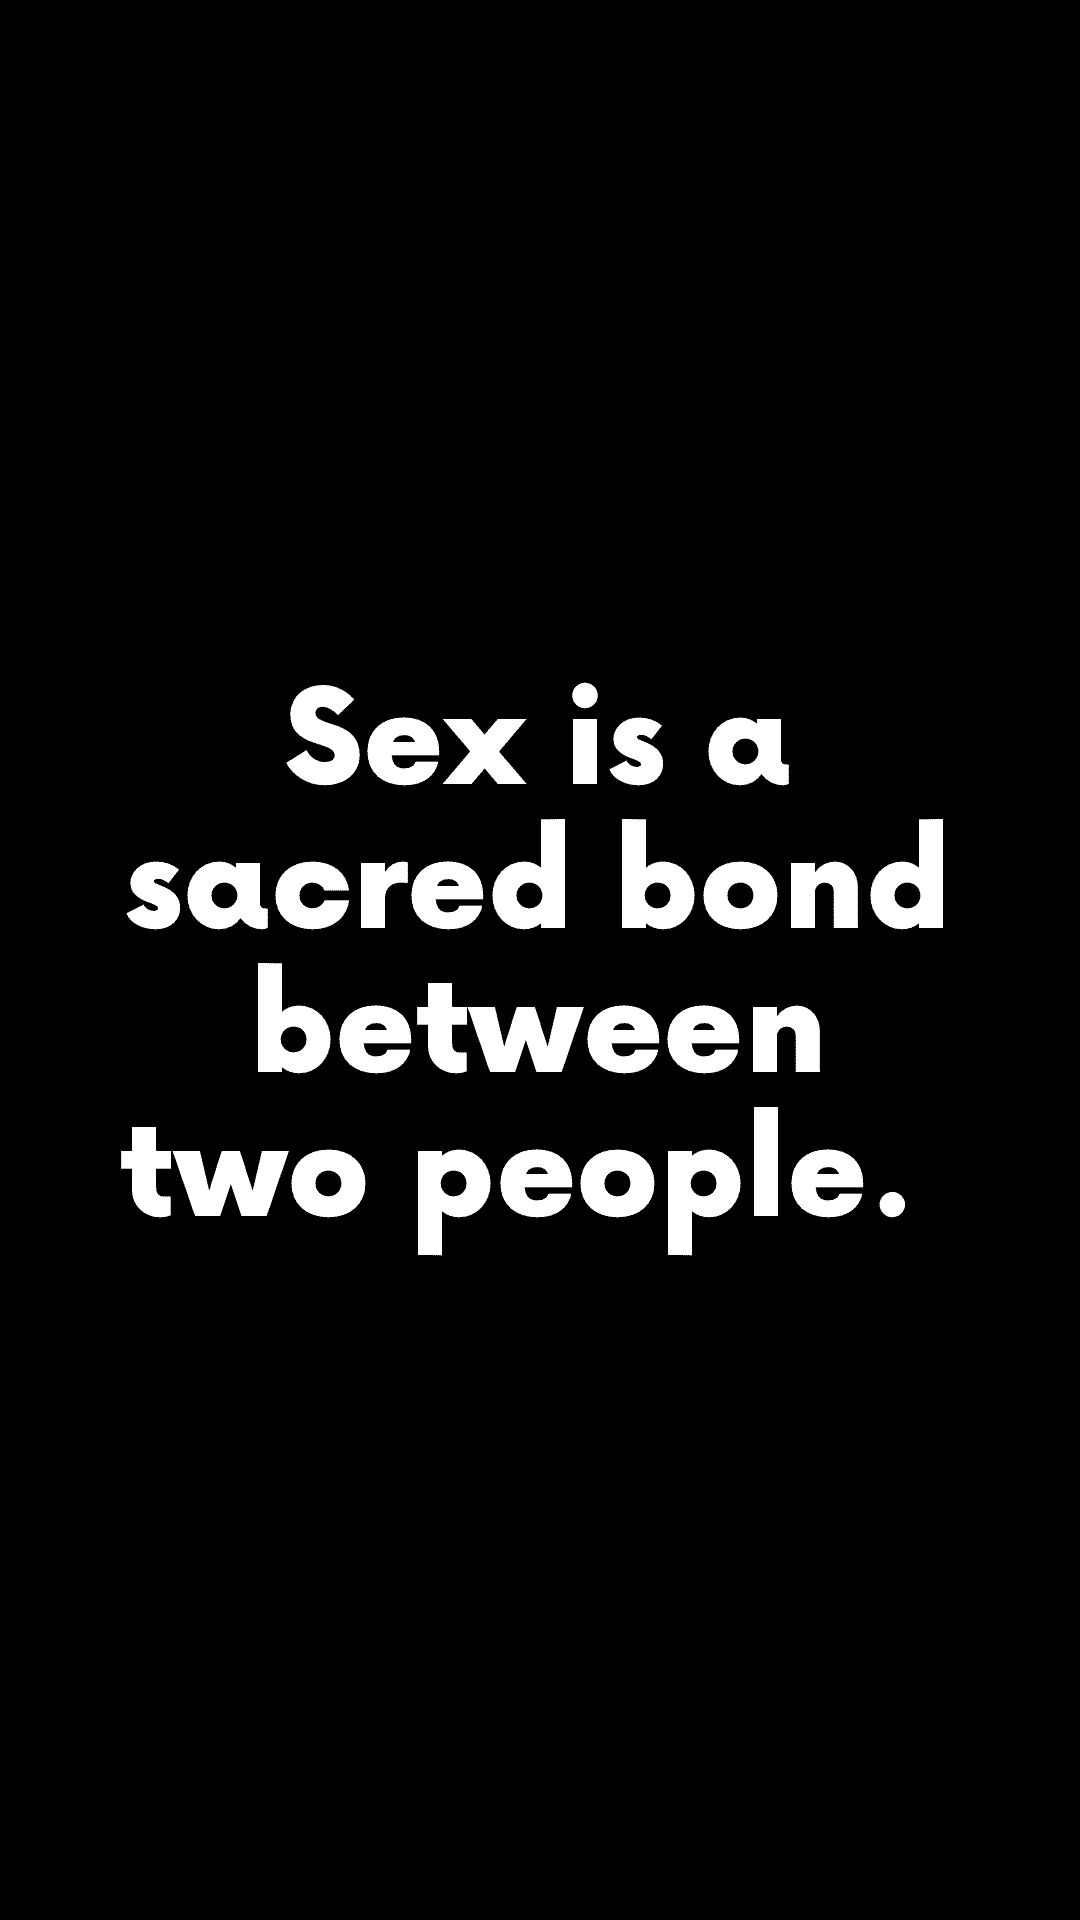 Sex is a sacred bond between two people. (Quote)